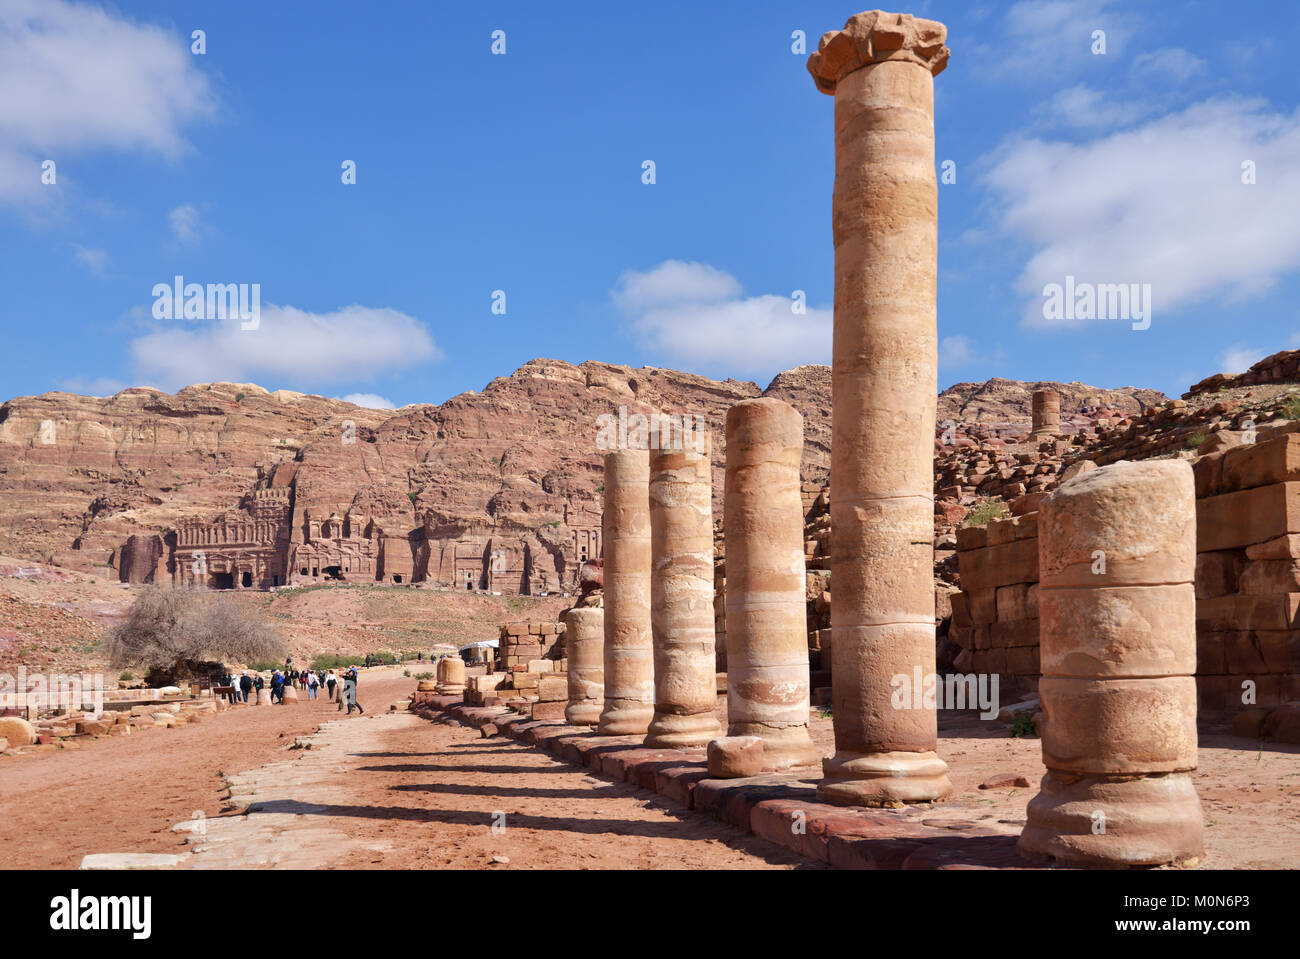 Petra, Jordan - March 15, 2014: Tourists on the Colonnaded street of Petra against ancient Nabataean tombs. Since 1985, Petra is listed as UNESCO Worl Stock Photo